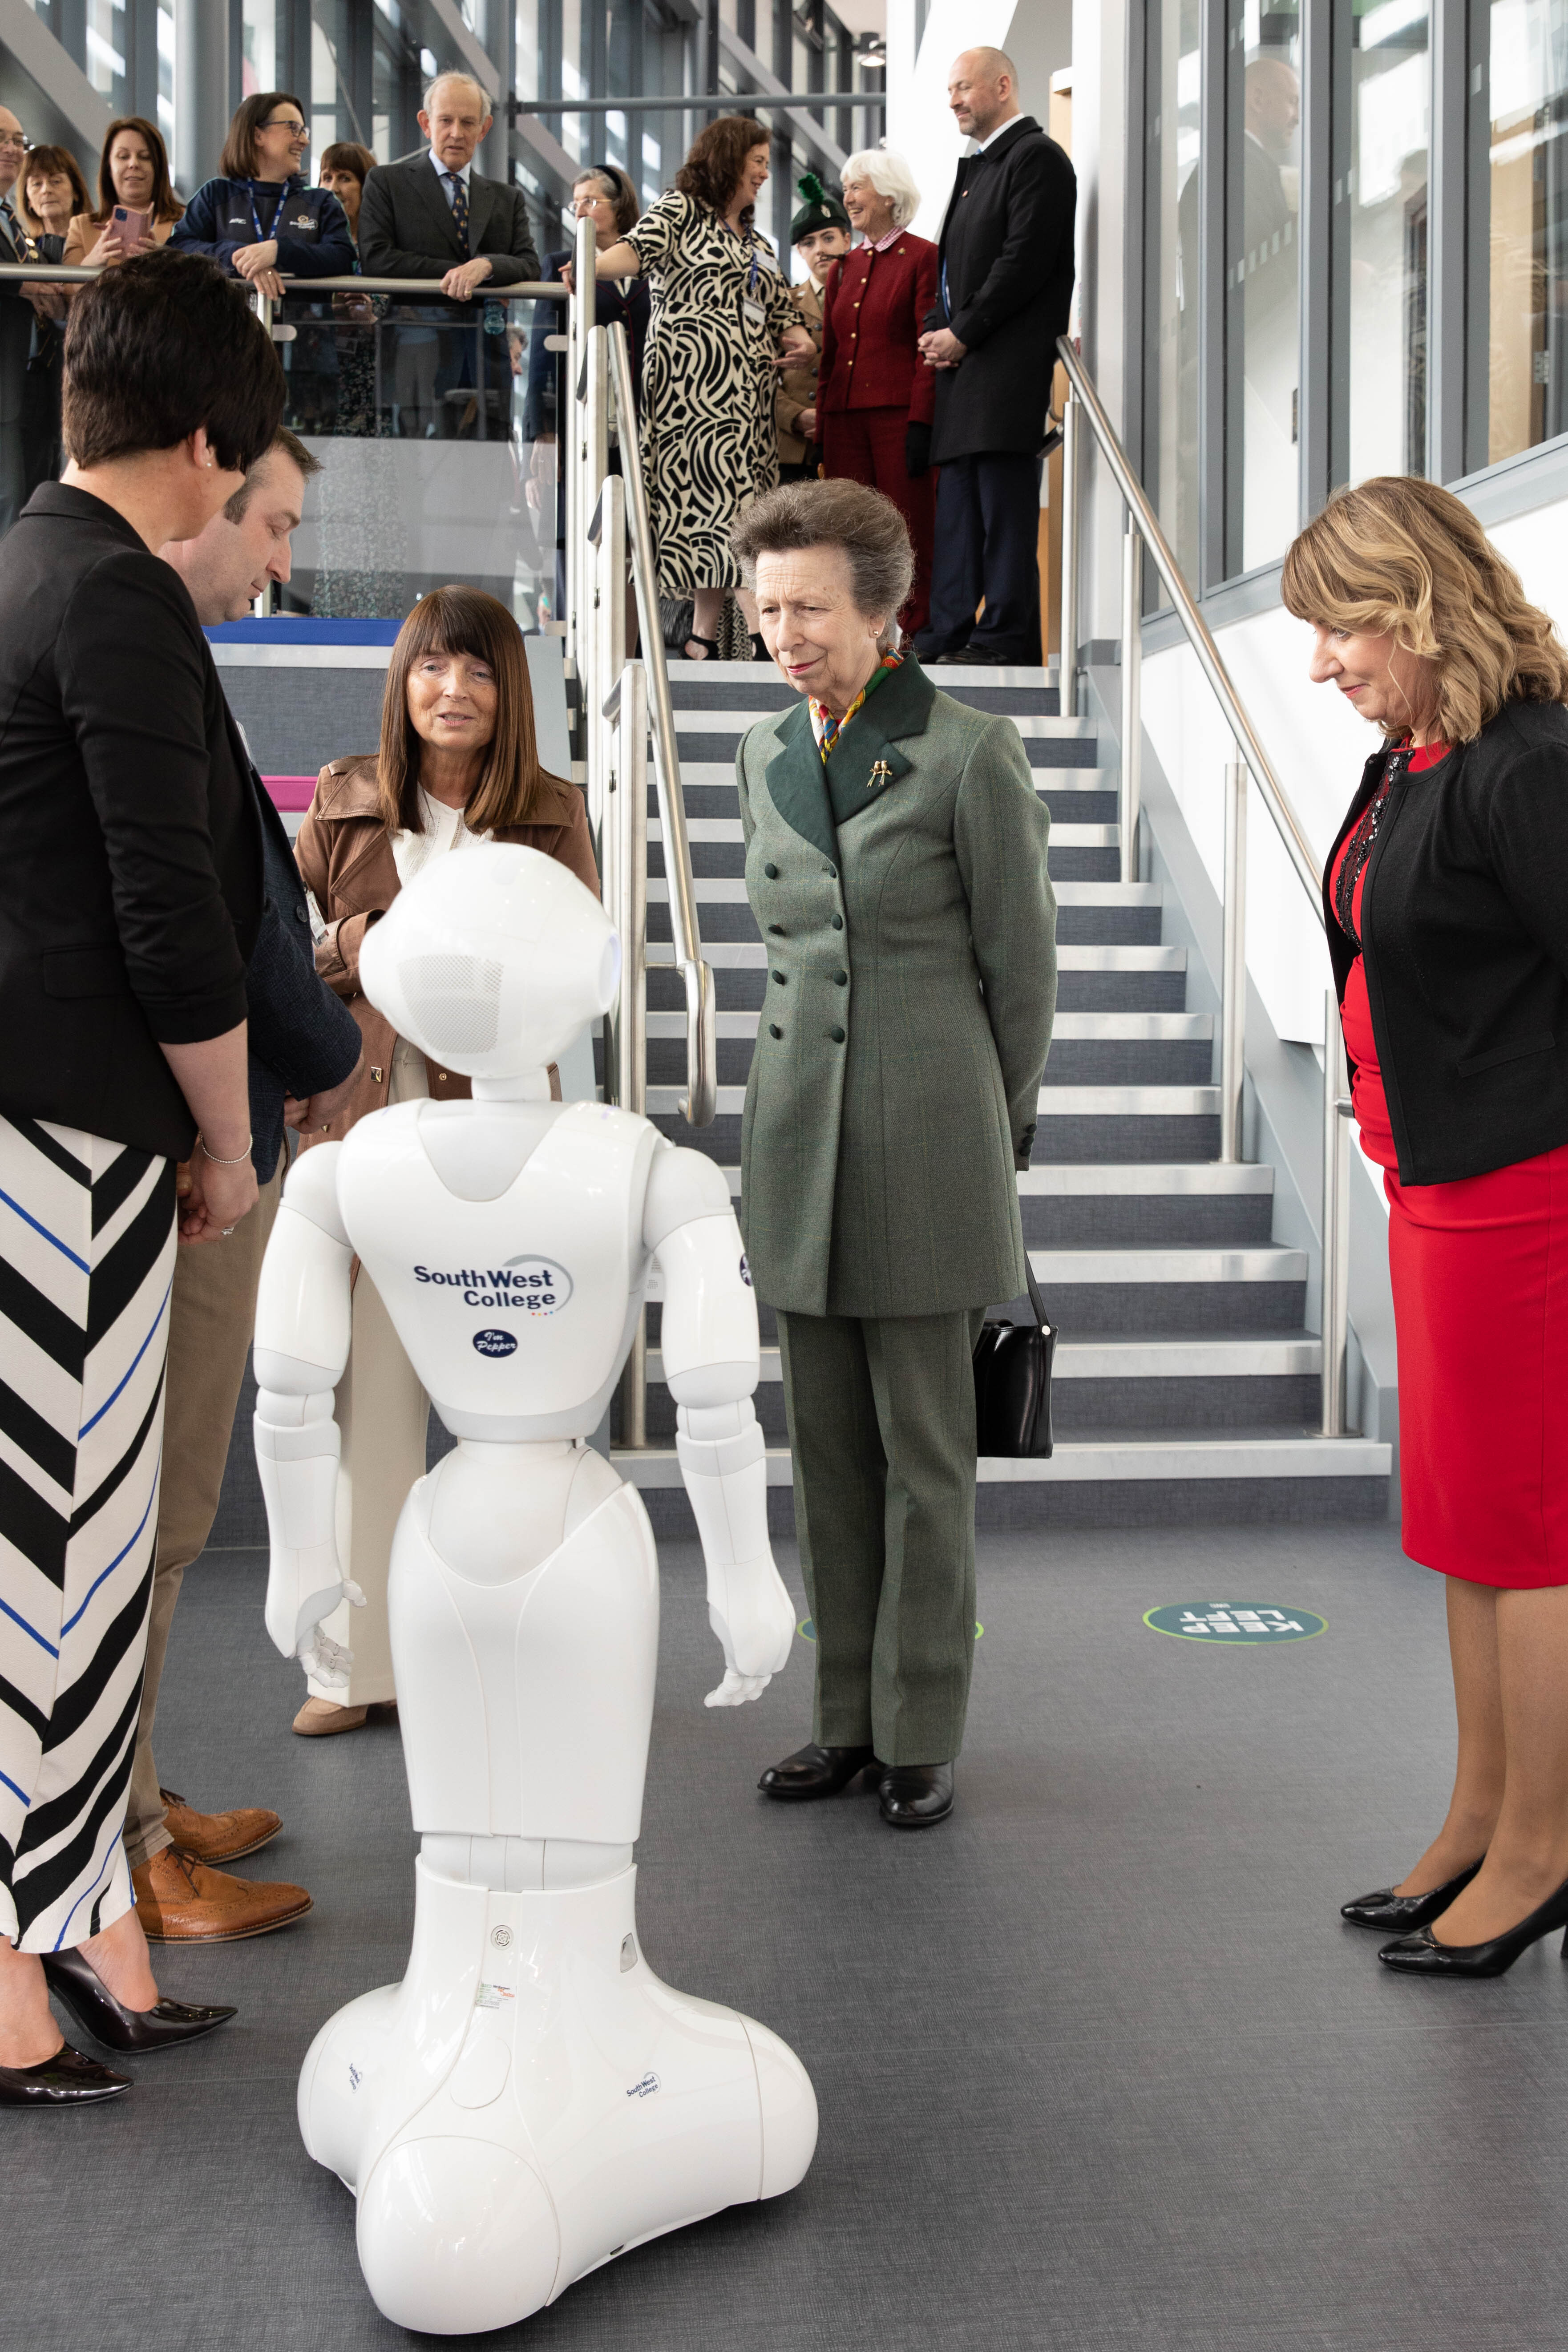 Her Royal Highness, The Princess Royal is introduced to Pepper the Robot by representatives from the Engineering, IT and Creative Industries Department